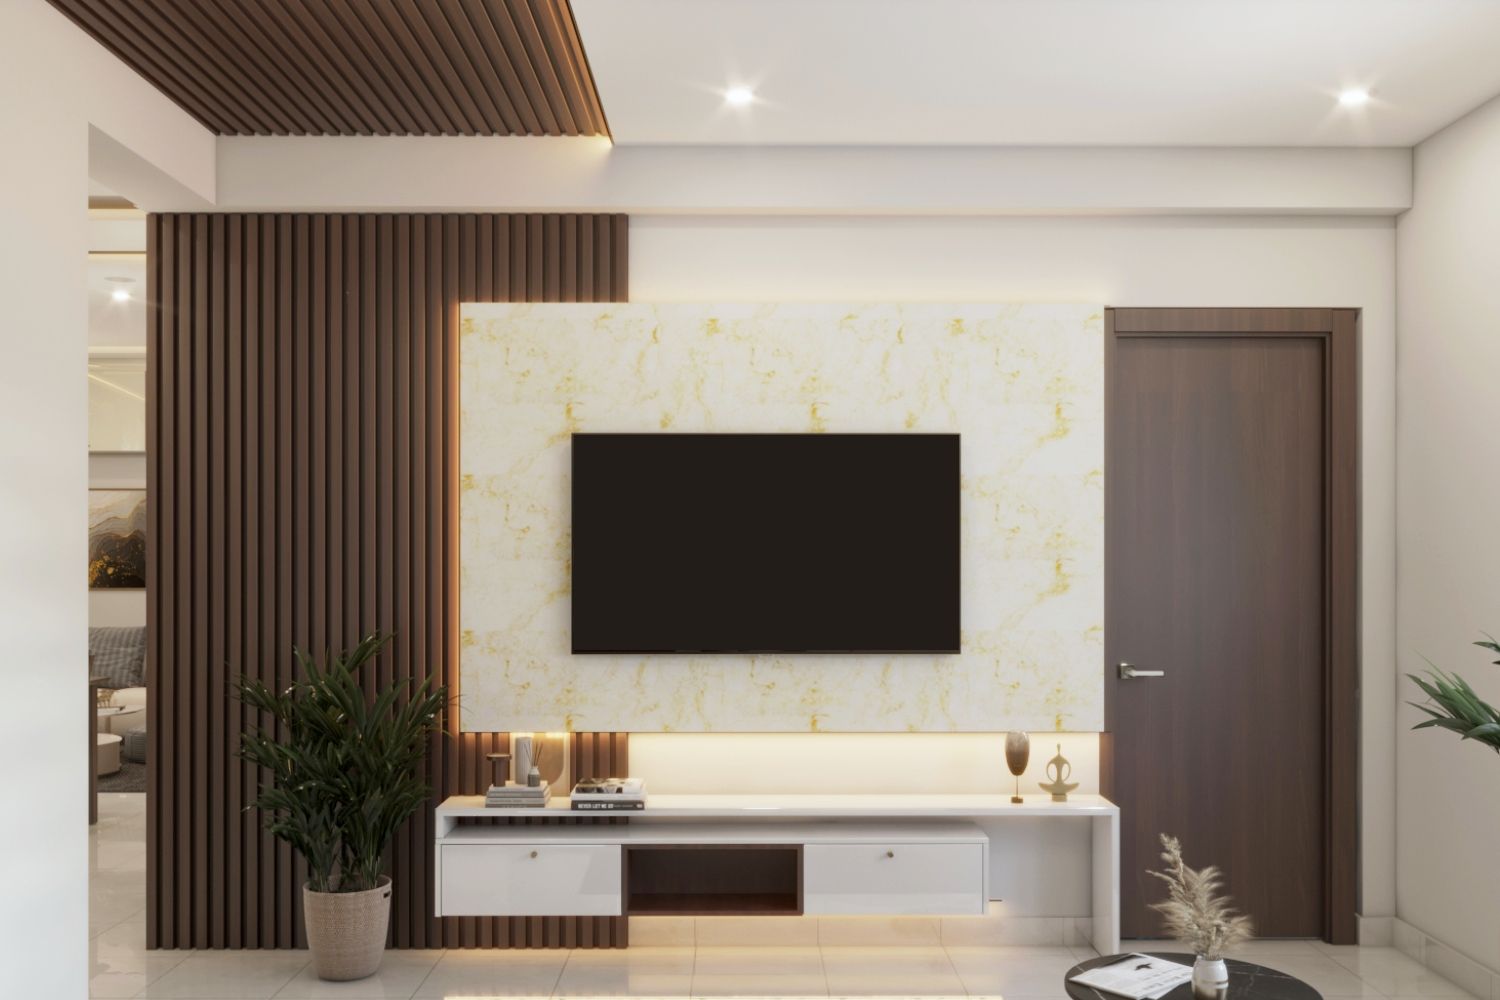 Modern TV Unit Design With Marble Back Wall And Wooden Panelling